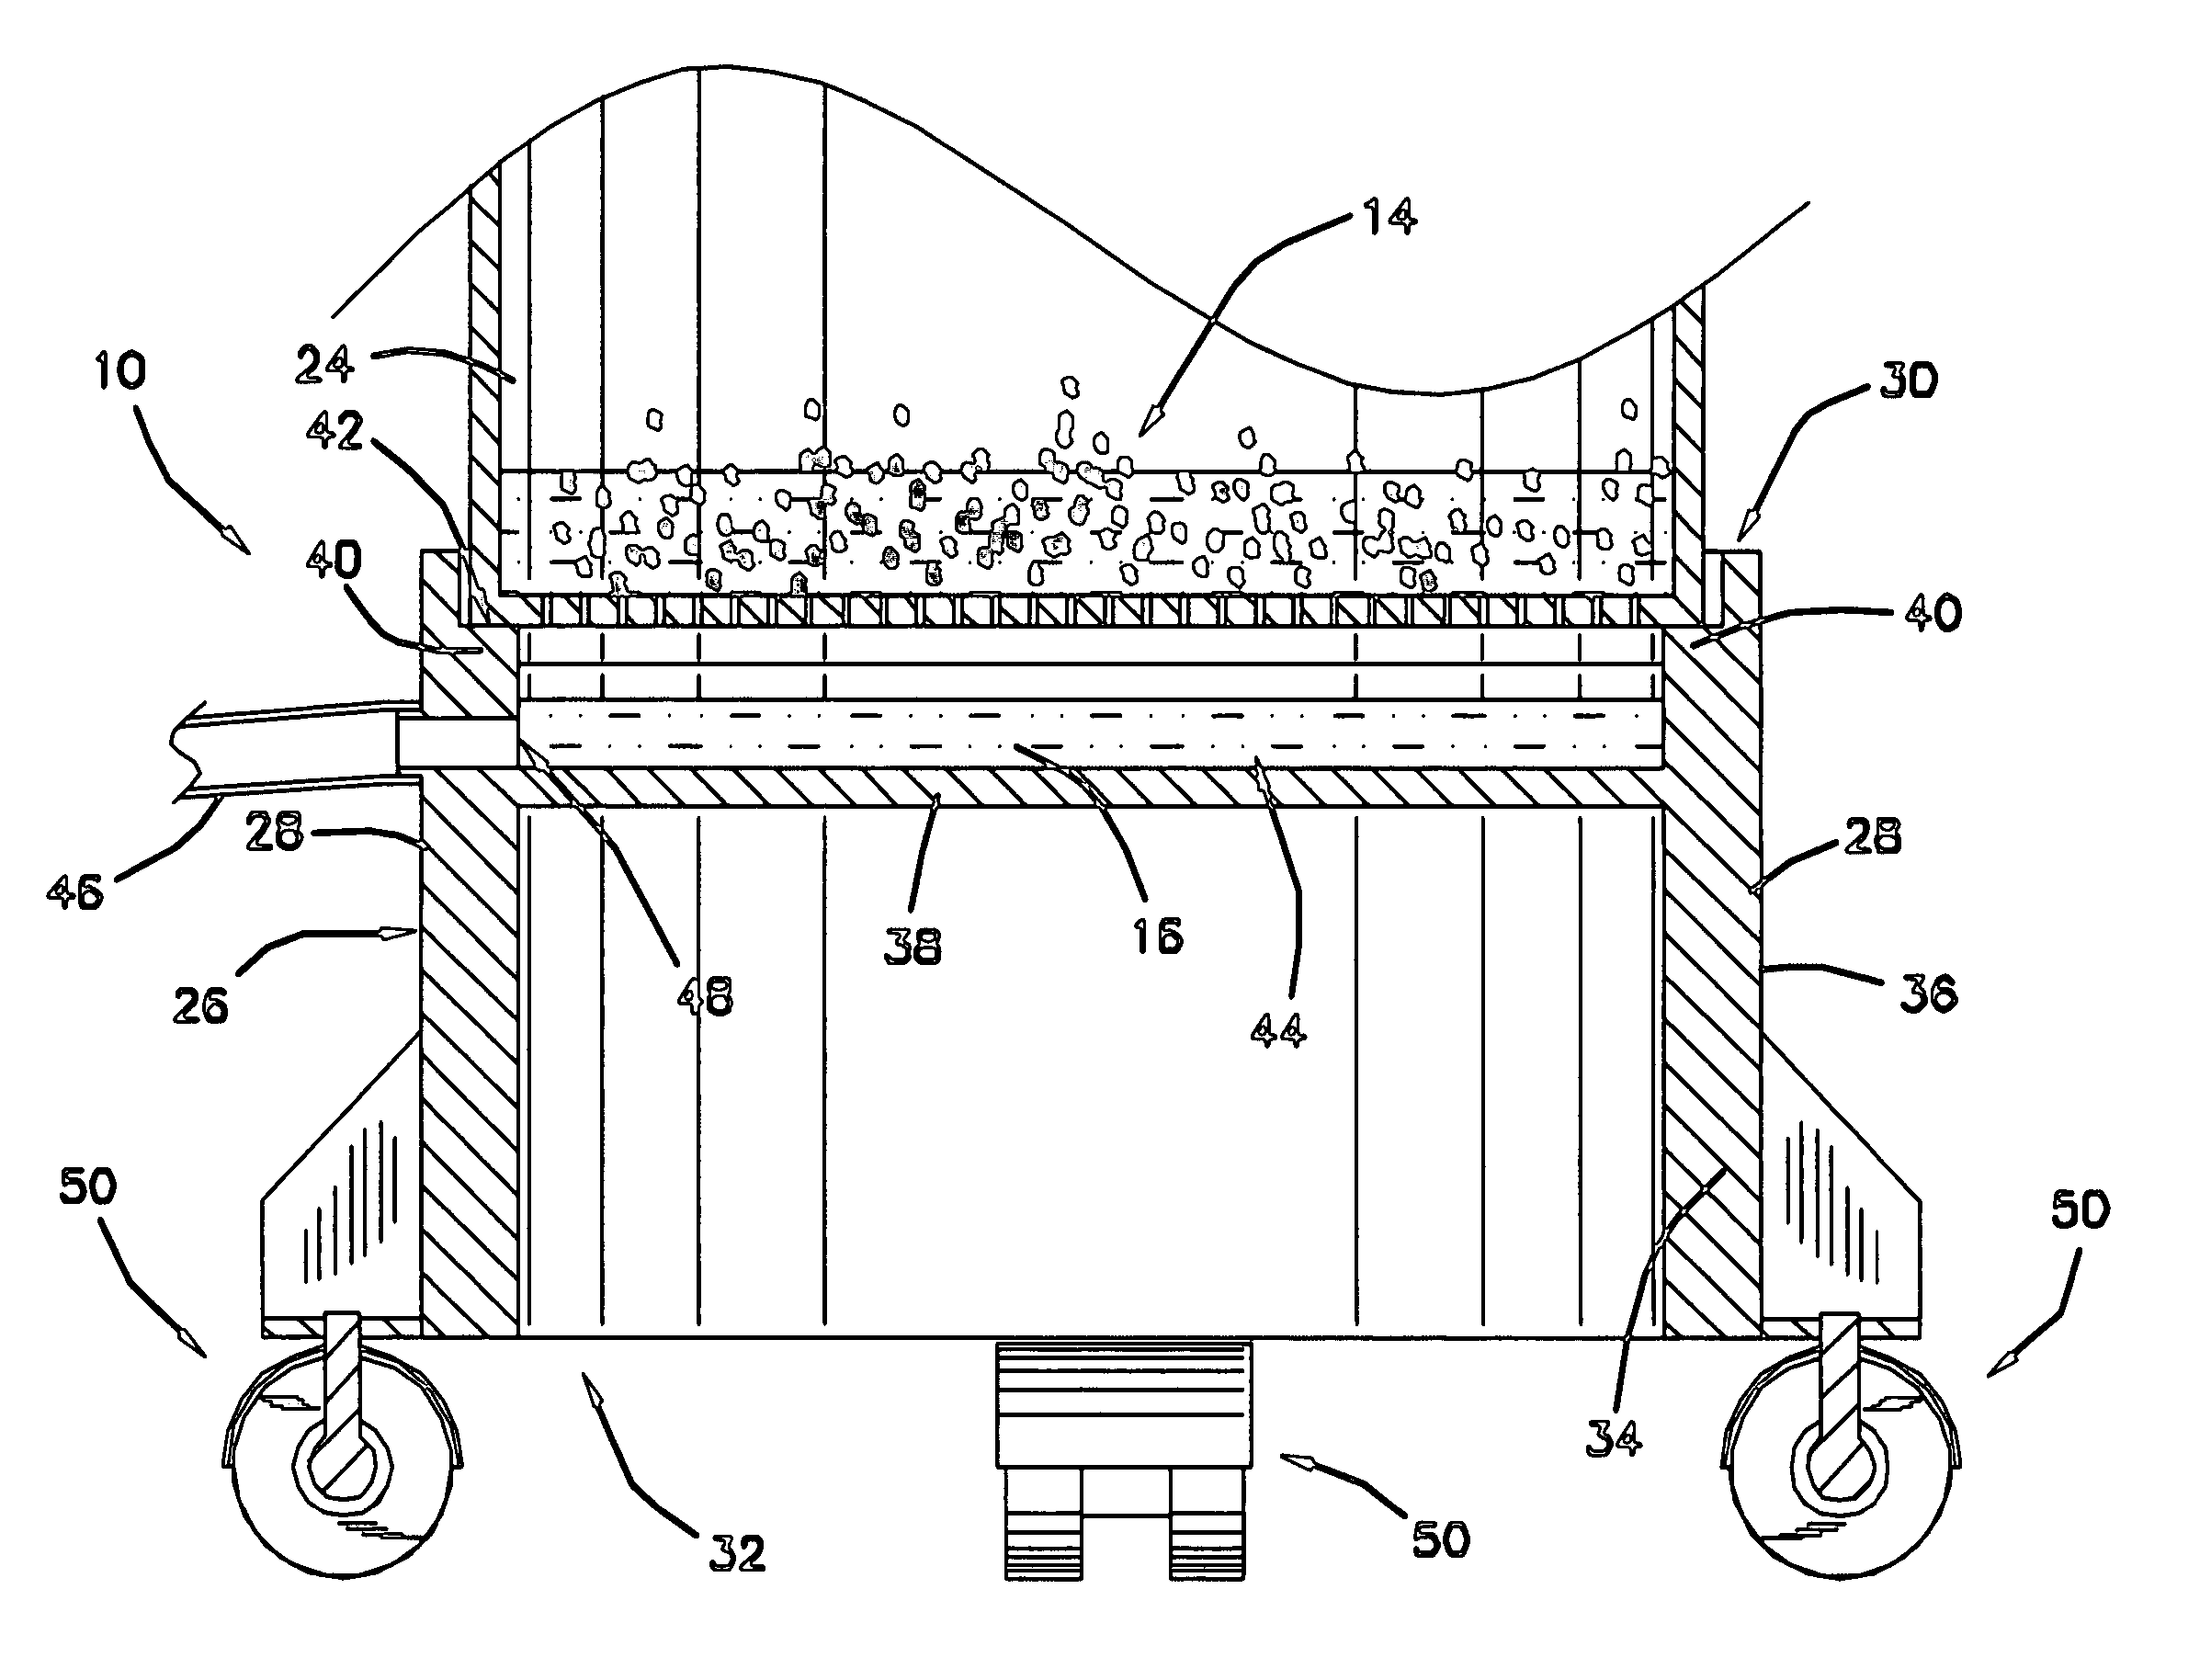 Apparatus for use in reclaiming coolant used in cutting machines